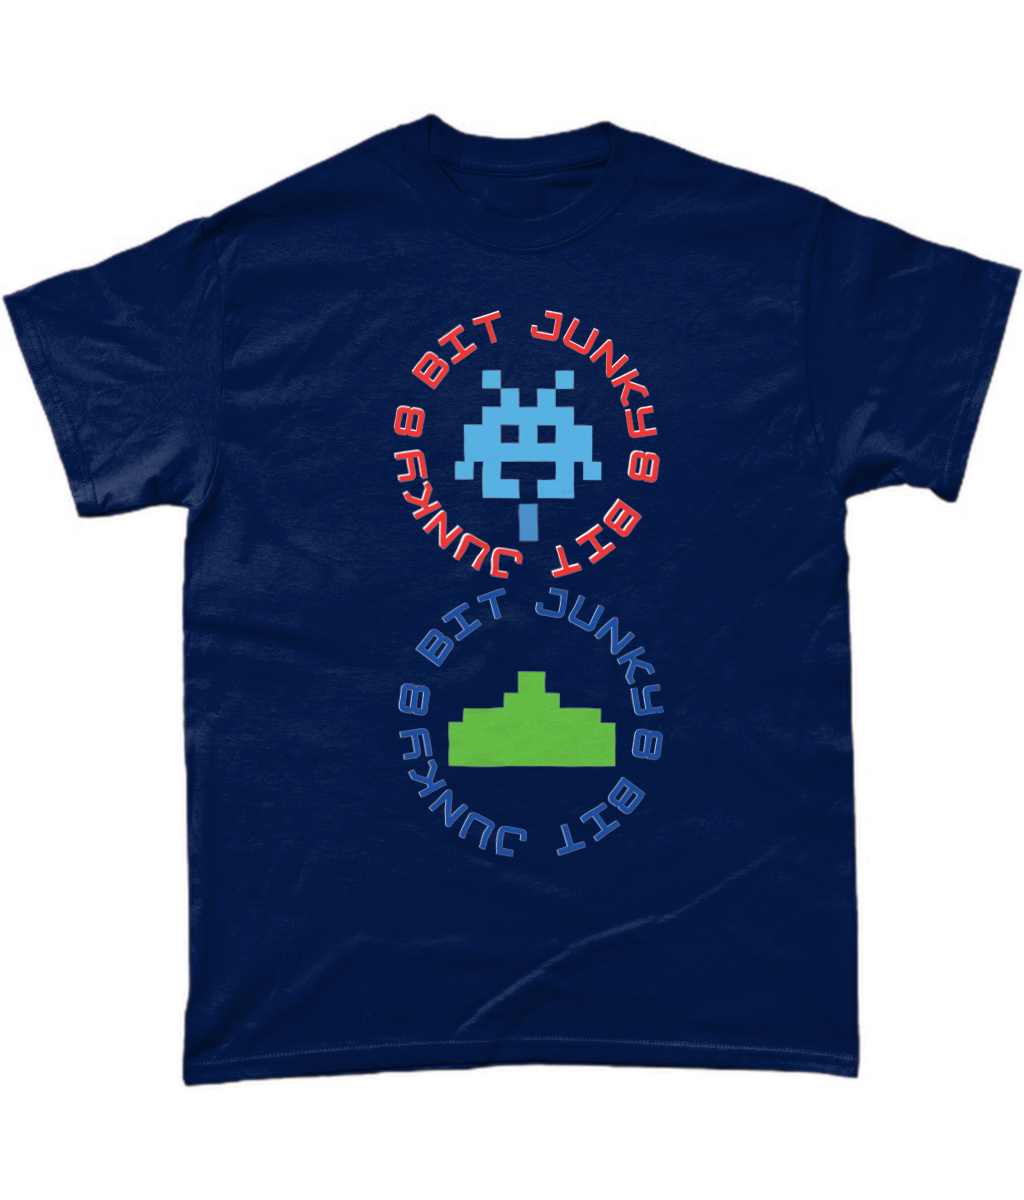 Navy T-Shirt with words 8-bit junky in 2 circles making a figure 8 with an invader in one circle and earth ship in the other